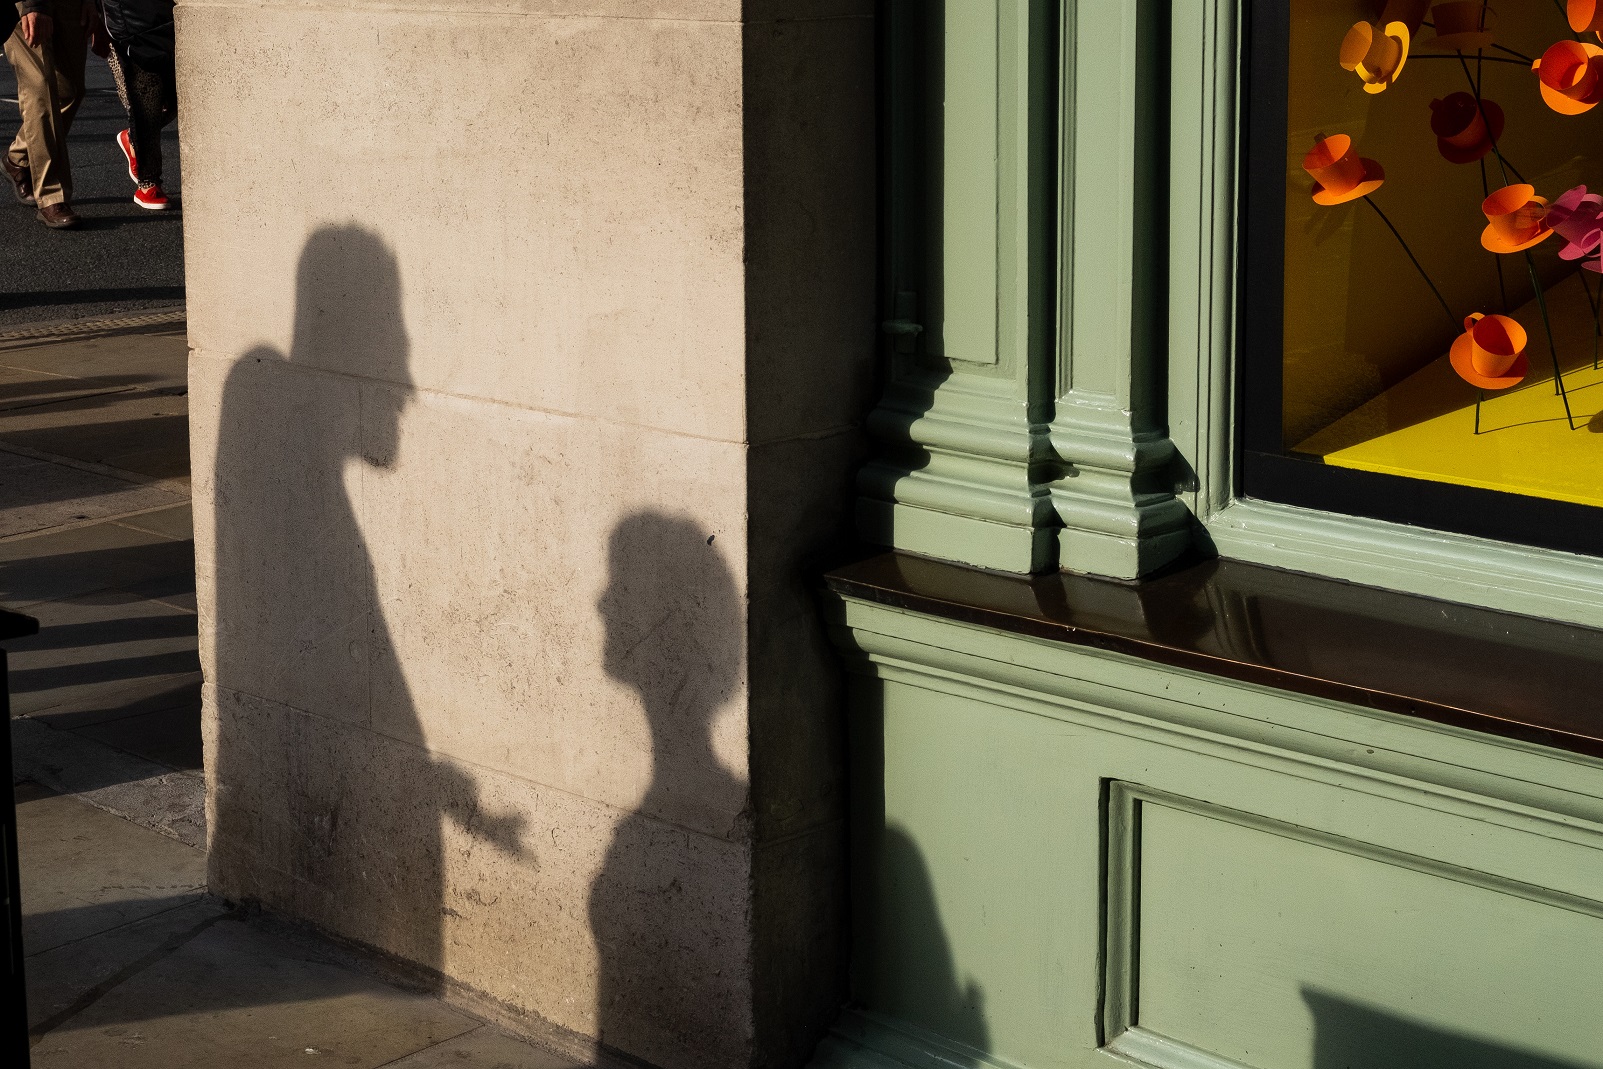 Shadow on side of building of man and woman having an unpleasant conversation.